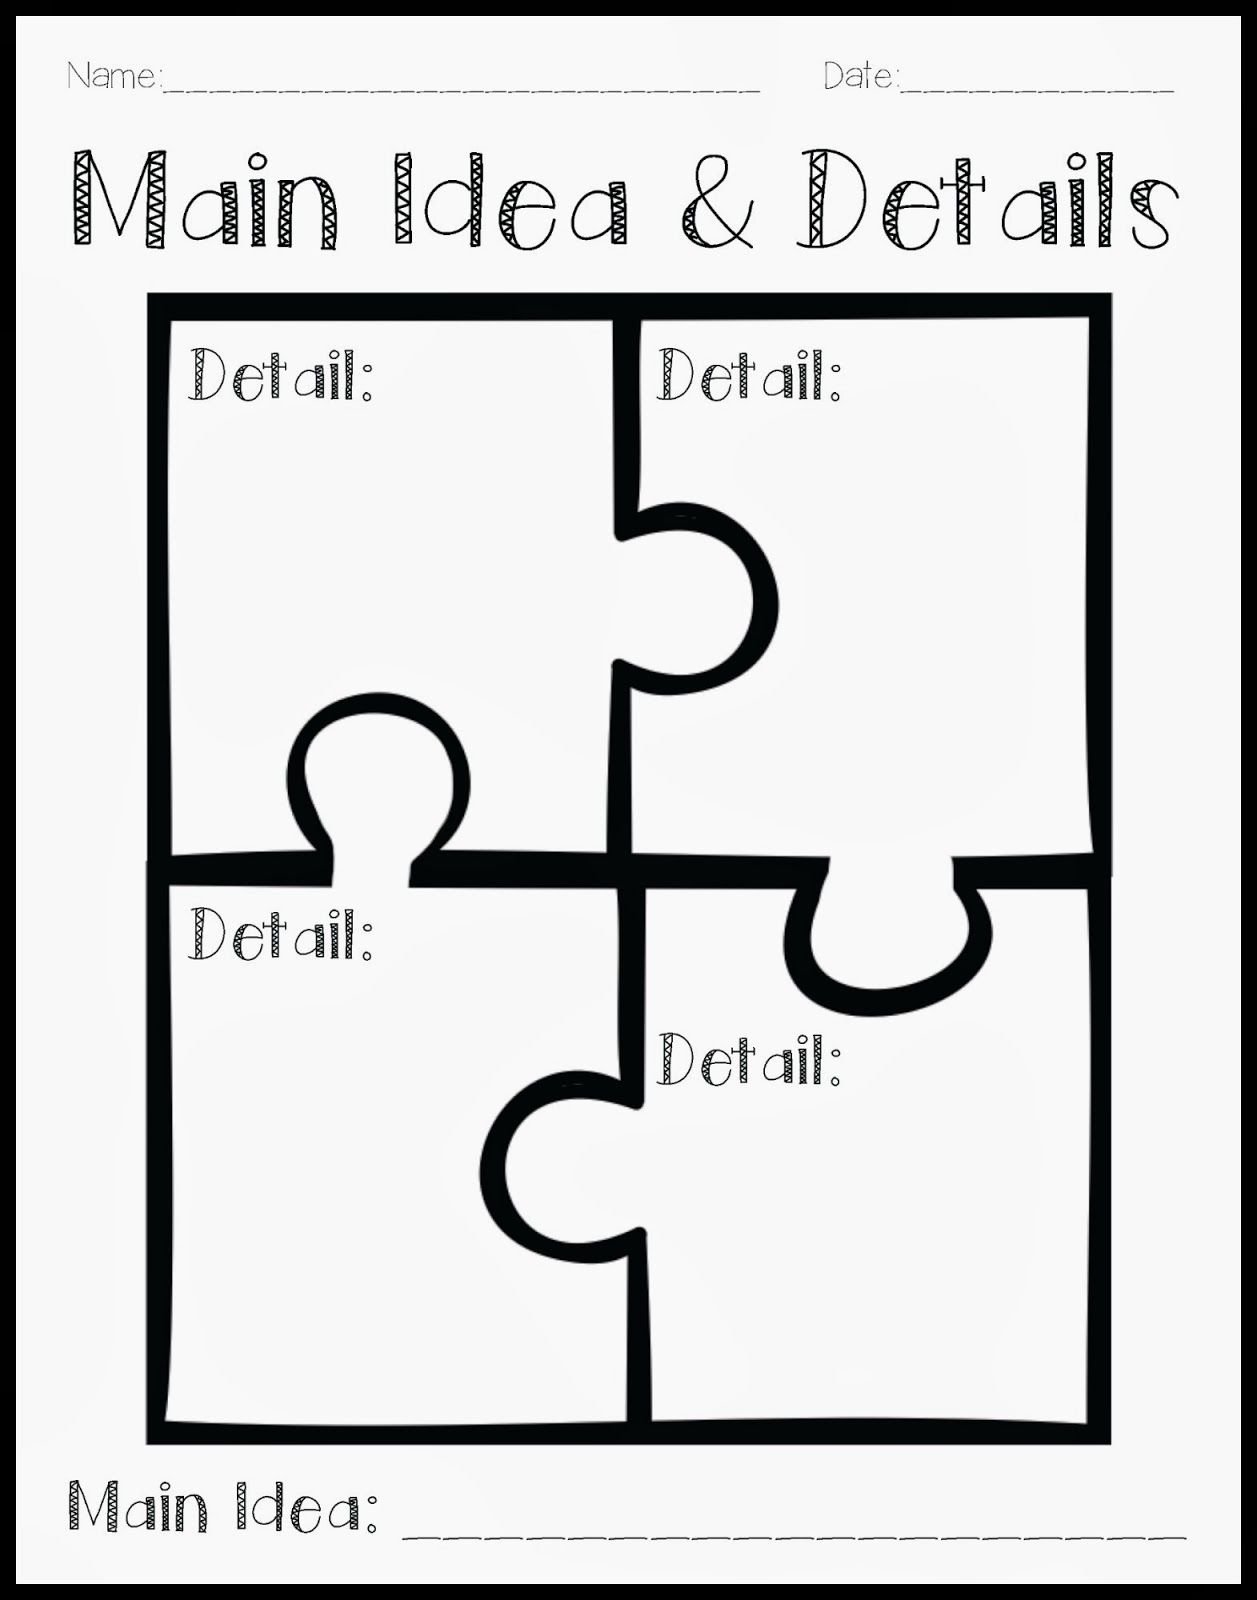 10 Most Popular Main Idea And Supporting Details Graphic Organizer using a puzzle to teach main idea and details the art of language 7 2022